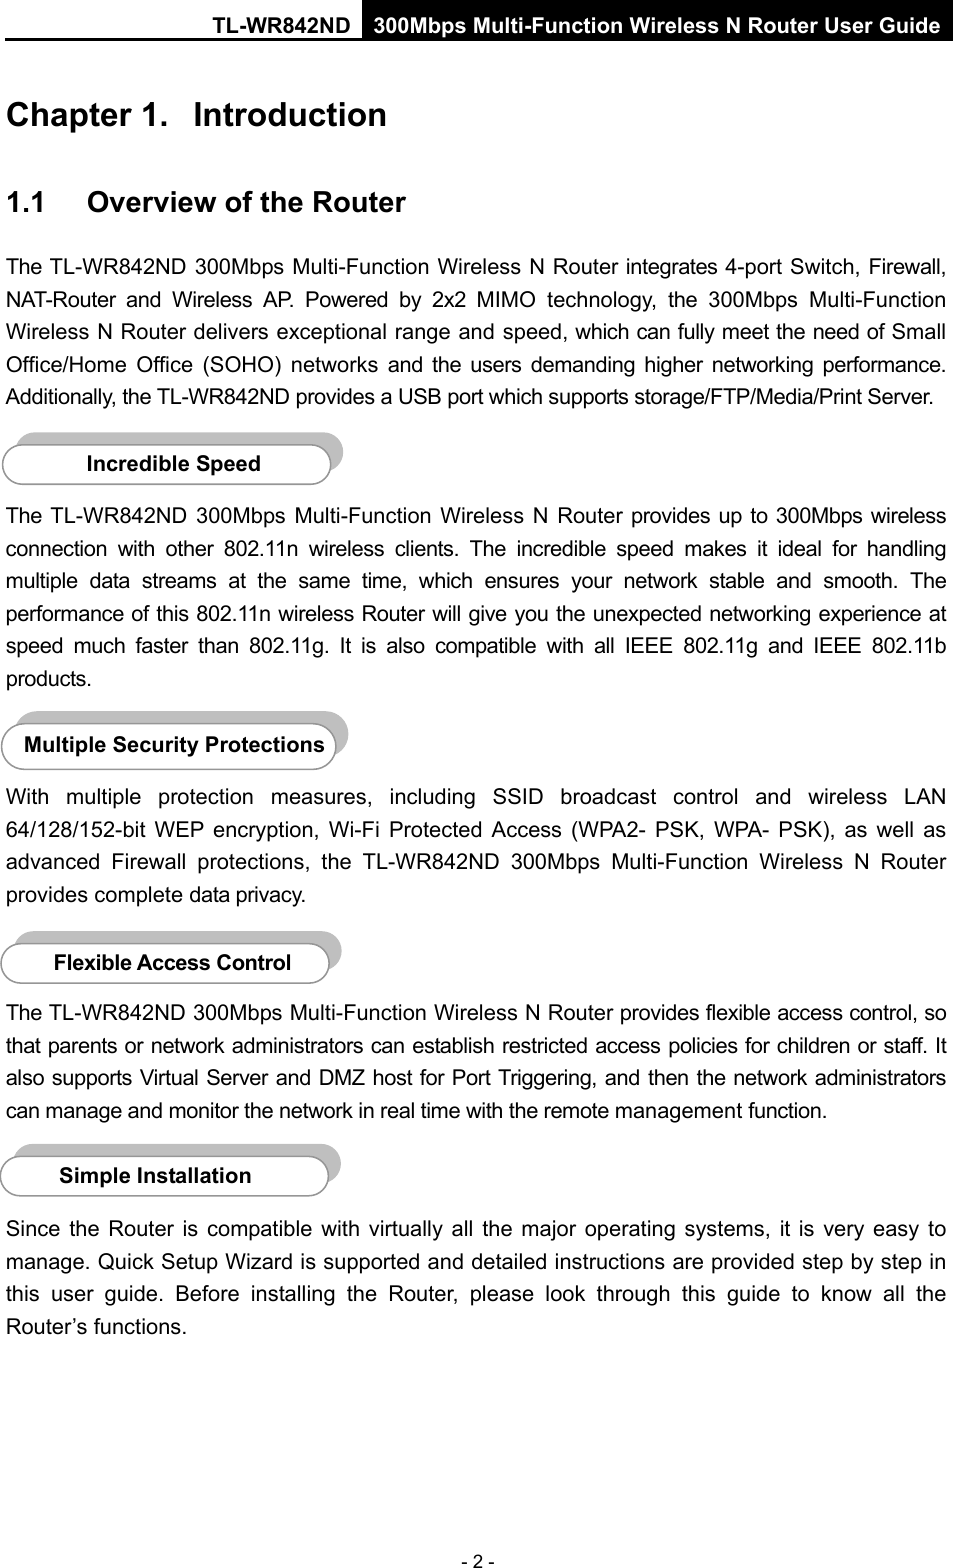 TL-WR842ND 300Mbps Multi-Function Wireless N Router User Guide  - 2 - Chapter 1.  Introduction 1.1 Overview of the Router The TL-WR842ND 300Mbps Multi-Function Wireless N Router integrates 4-port Switch, Firewall, NAT-Router and Wireless AP. Powered by  2x2  MIMO technology,  the 300Mbps Multi-Function Wireless N Router delivers exceptional range and speed, which can fully meet the need of Small Office/Home Office (SOHO) networks and the users demanding higher networking performance. Additionally, the TL-WR842ND provides a USB port which supports storage/FTP/Media/Print Server.  The TL-WR842ND 300Mbps Multi-Function Wireless N Router provides up to 300Mbps wireless connection with other 802.11n wireless clients. The incredible speed makes it ideal for handling multiple data streams at the same time, which ensures your network stable and smooth. The performance of this 802.11n wireless Router will give you the unexpected networking experience at speed much faster than 802.11g.  It is also  compatible with all IEEE 802.11g and IEEE 802.11b products.  With multiple protection measures, including SSID broadcast control and wireless LAN 64/128/152-bit WEP encryption,  Wi-Fi  Protected Access (WPA2-  PSK, WPA-  PSK), as well as advanced Firewall protections, the TL-WR842ND 300Mbps Multi-Function Wireless N Router provides complete data privacy.    The TL-WR842ND 300Mbps Multi-Function Wireless N Router provides flexible access control, so that parents or network administrators can establish restricted access policies for children or staff. It also supports Virtual Server and DMZ host for Port Triggering, and then the network administrators can manage and monitor the network in real time with the remote management function.    Since the Router is compatible with virtually all the major operating systems, it is  very  easy to manage. Quick Setup Wizard is supported and detailed instructions are provided step by step in this user guide. Before installing the Router, please look through this guide to know all the Router’s functions.   Simple Installation Flexible Access Control  Multiple Security Protections Incredible Speed  